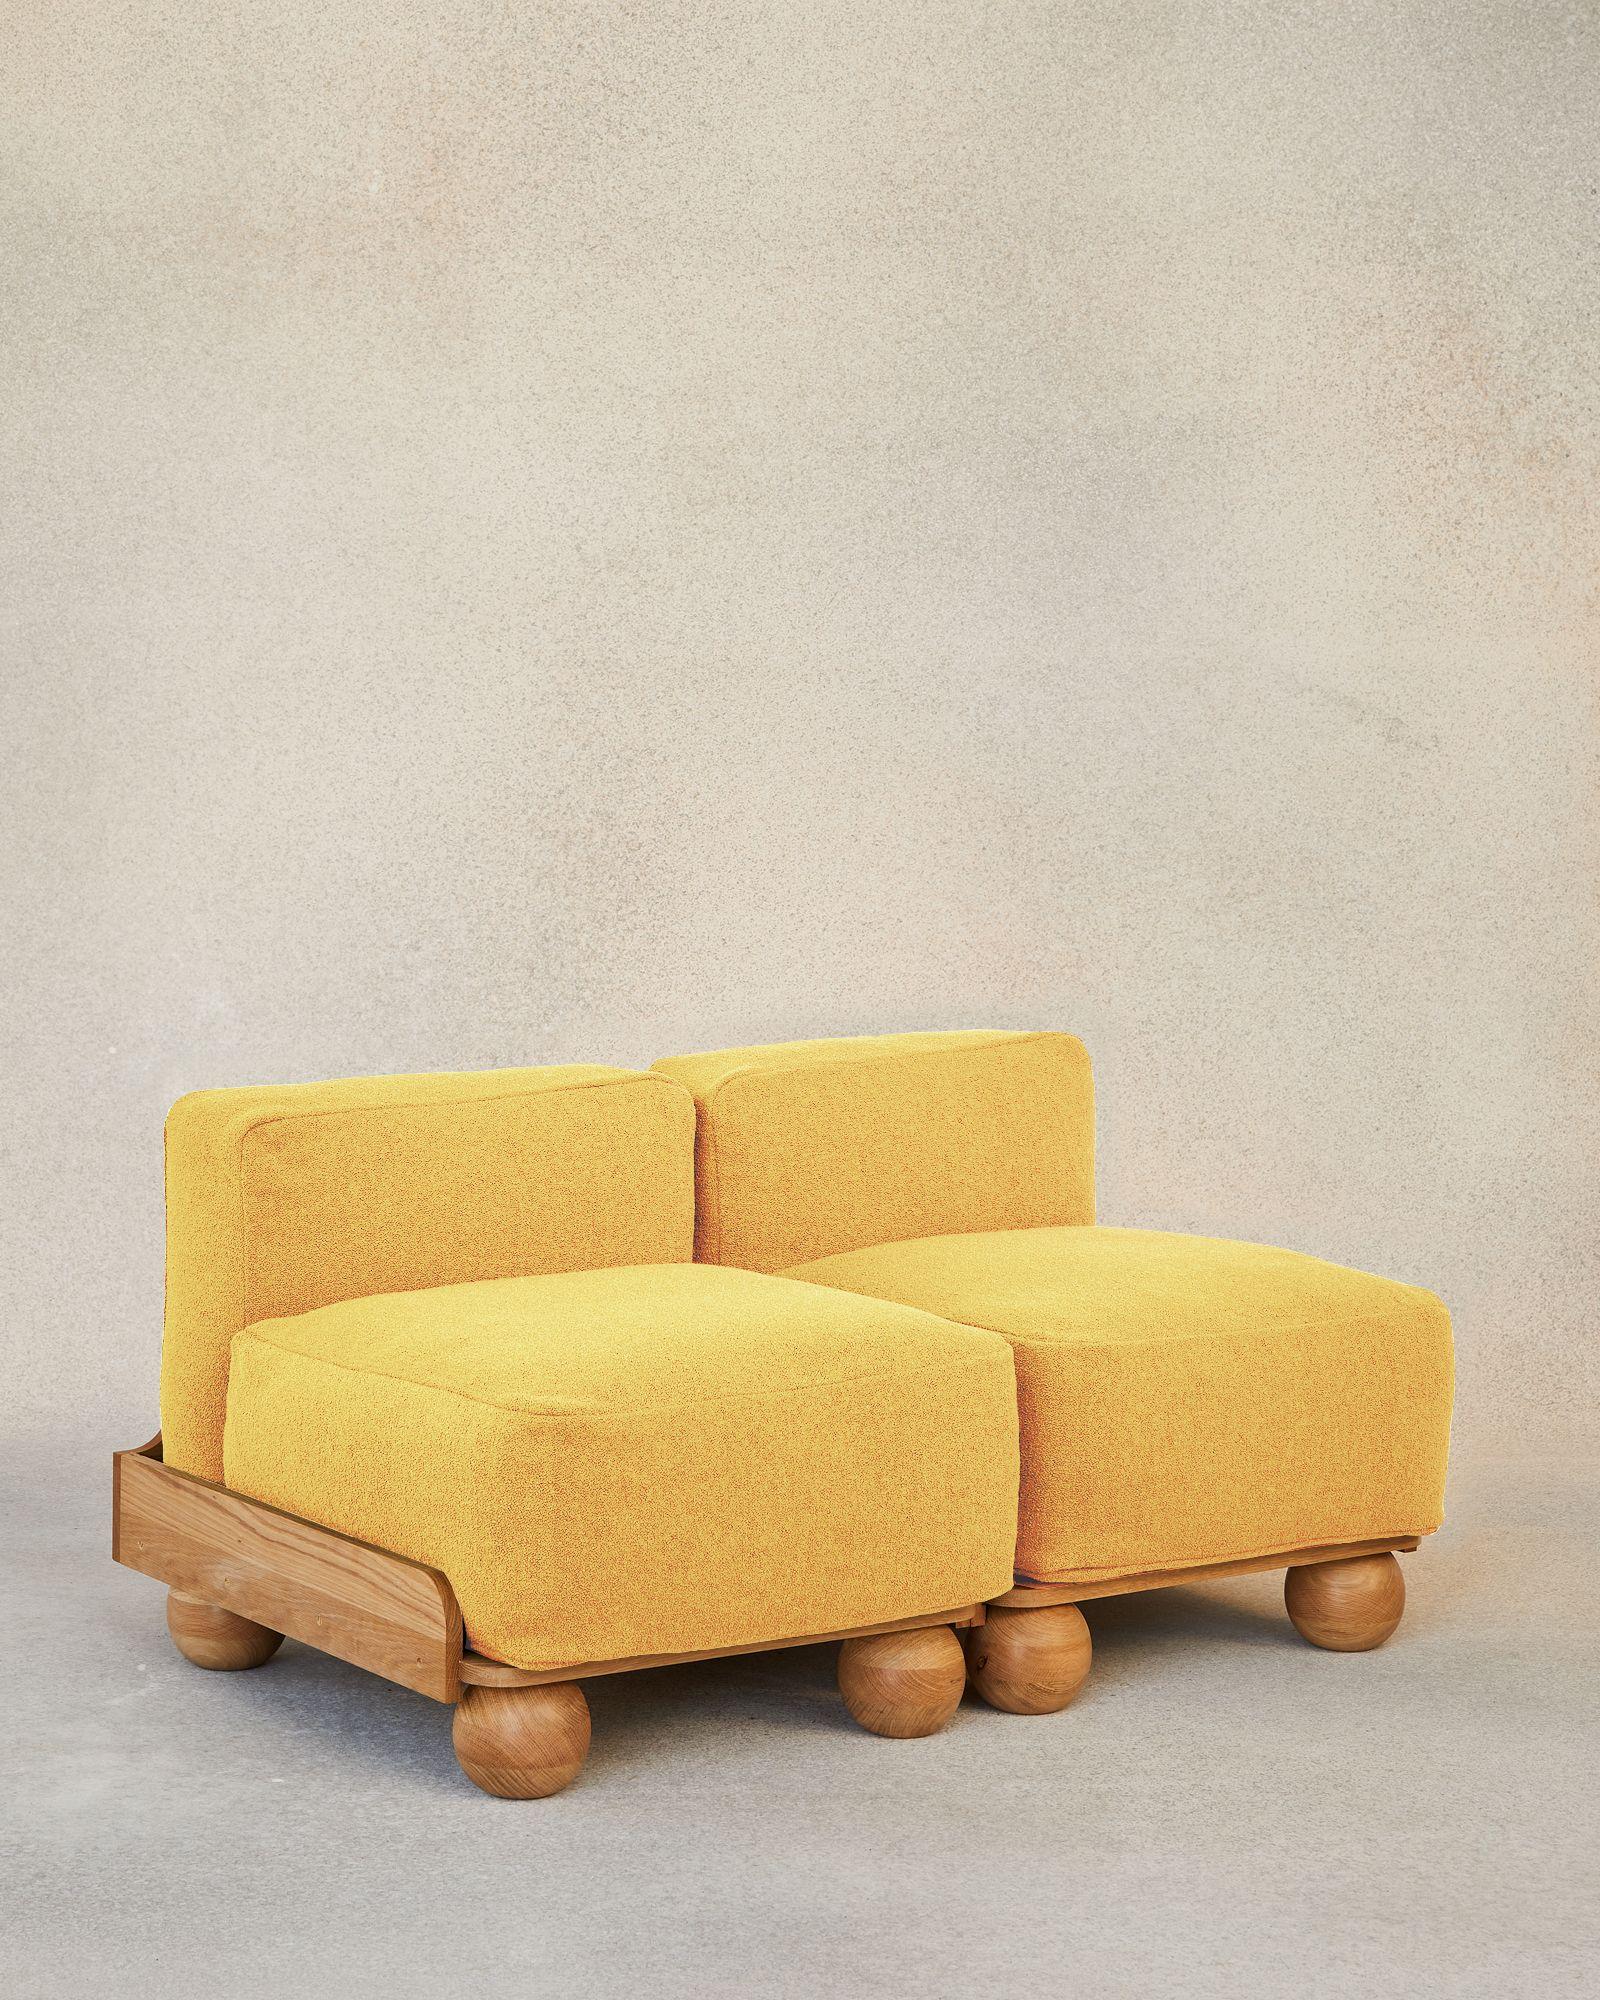 Cove 2.5 seater slipper by Fred Rigby Studio
Dimensions: L 127.5 x W 77 x H 65 cm
Materials: Solid Oak, Bouclé Weave Wool, Upholstered Cushion
Variations of colours available.

Fred Rigby Studio is a London-based furniture and interior design